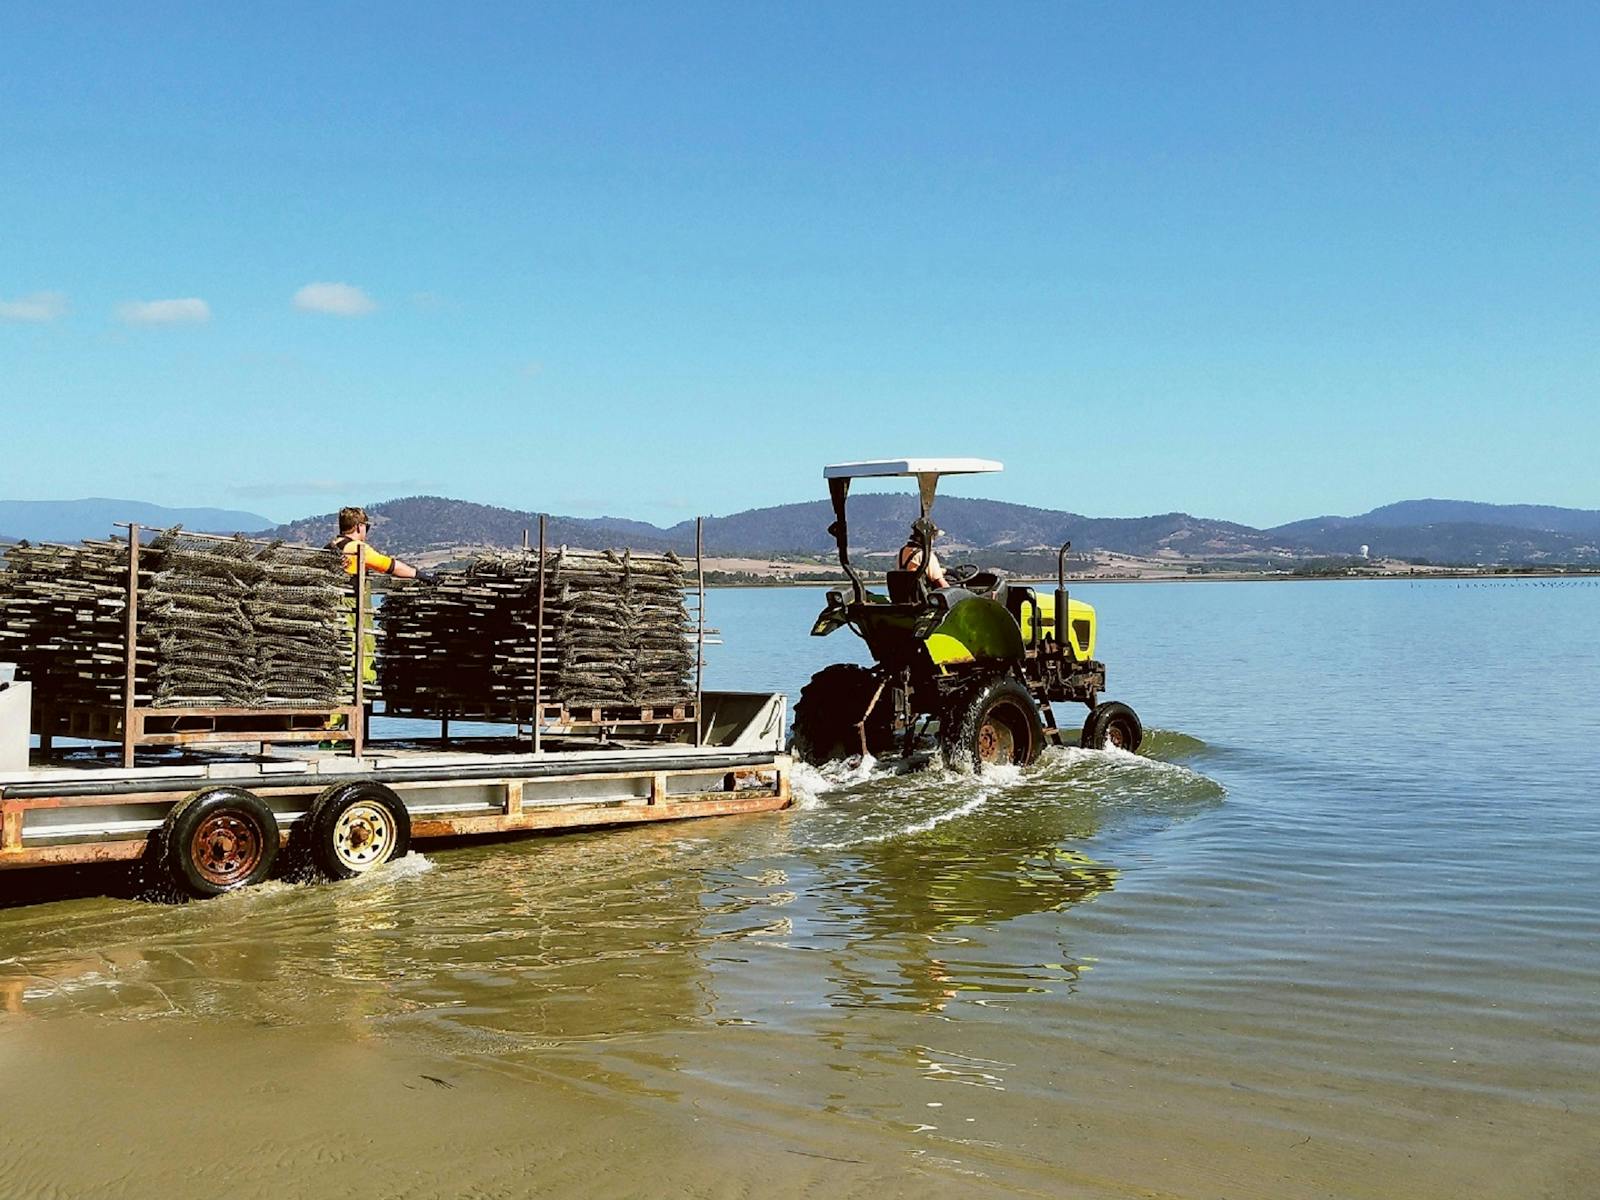 At work on our oyster farm on a beautiful sunny day.